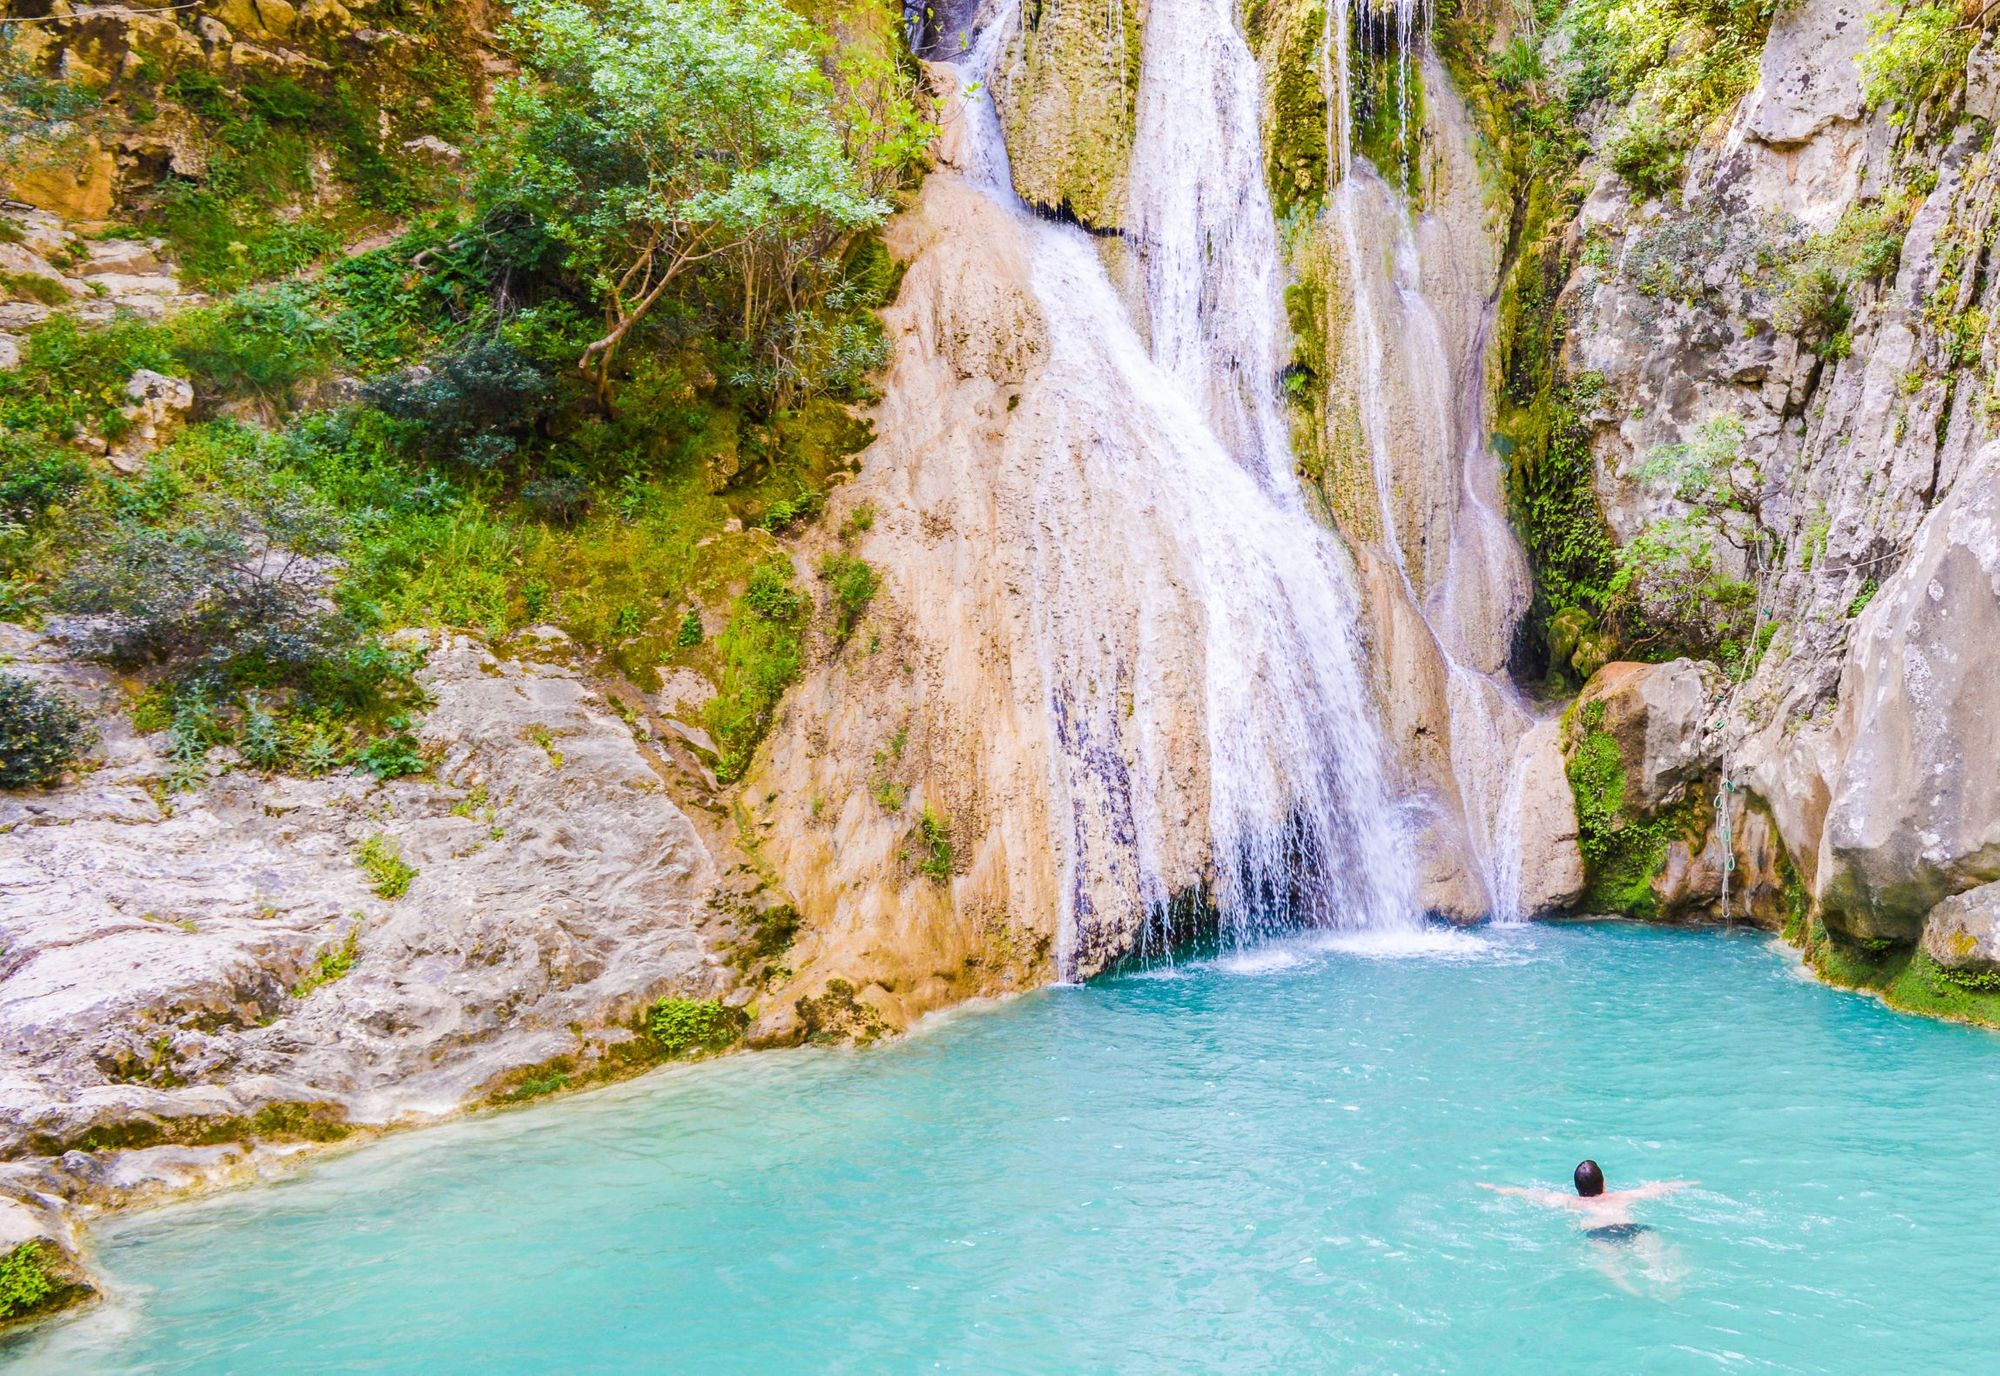 A turquoise pool at Polylimnio. Photo: Much Better Adventures